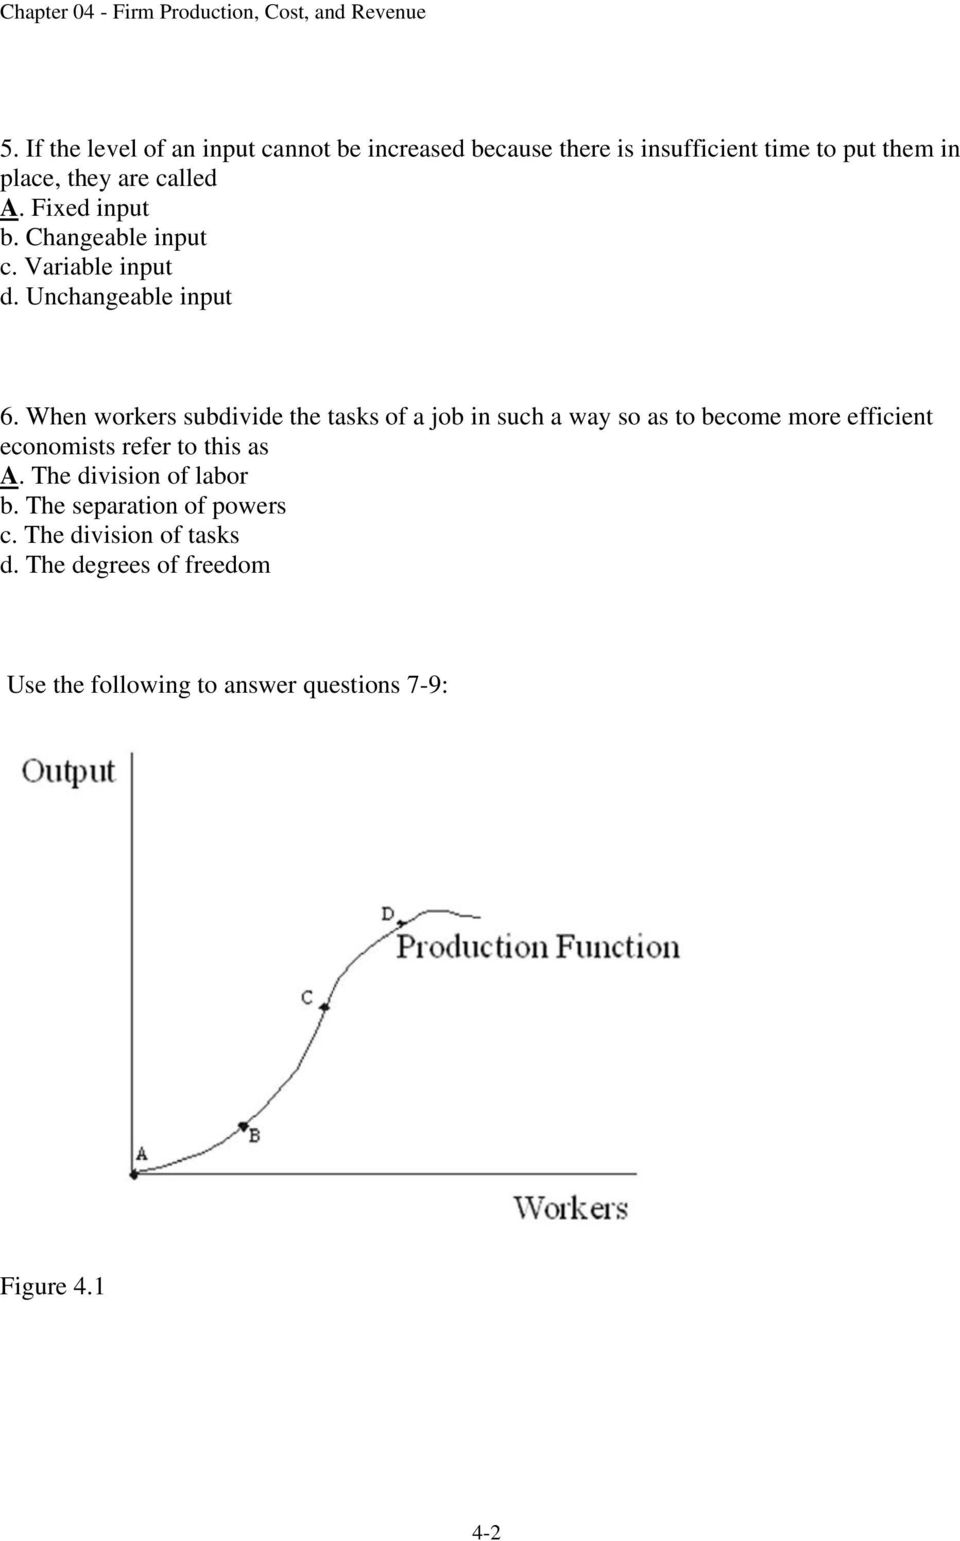 When workers subdivide the tasks of a job in such a way so as to become more efficient economists refer to this as A.